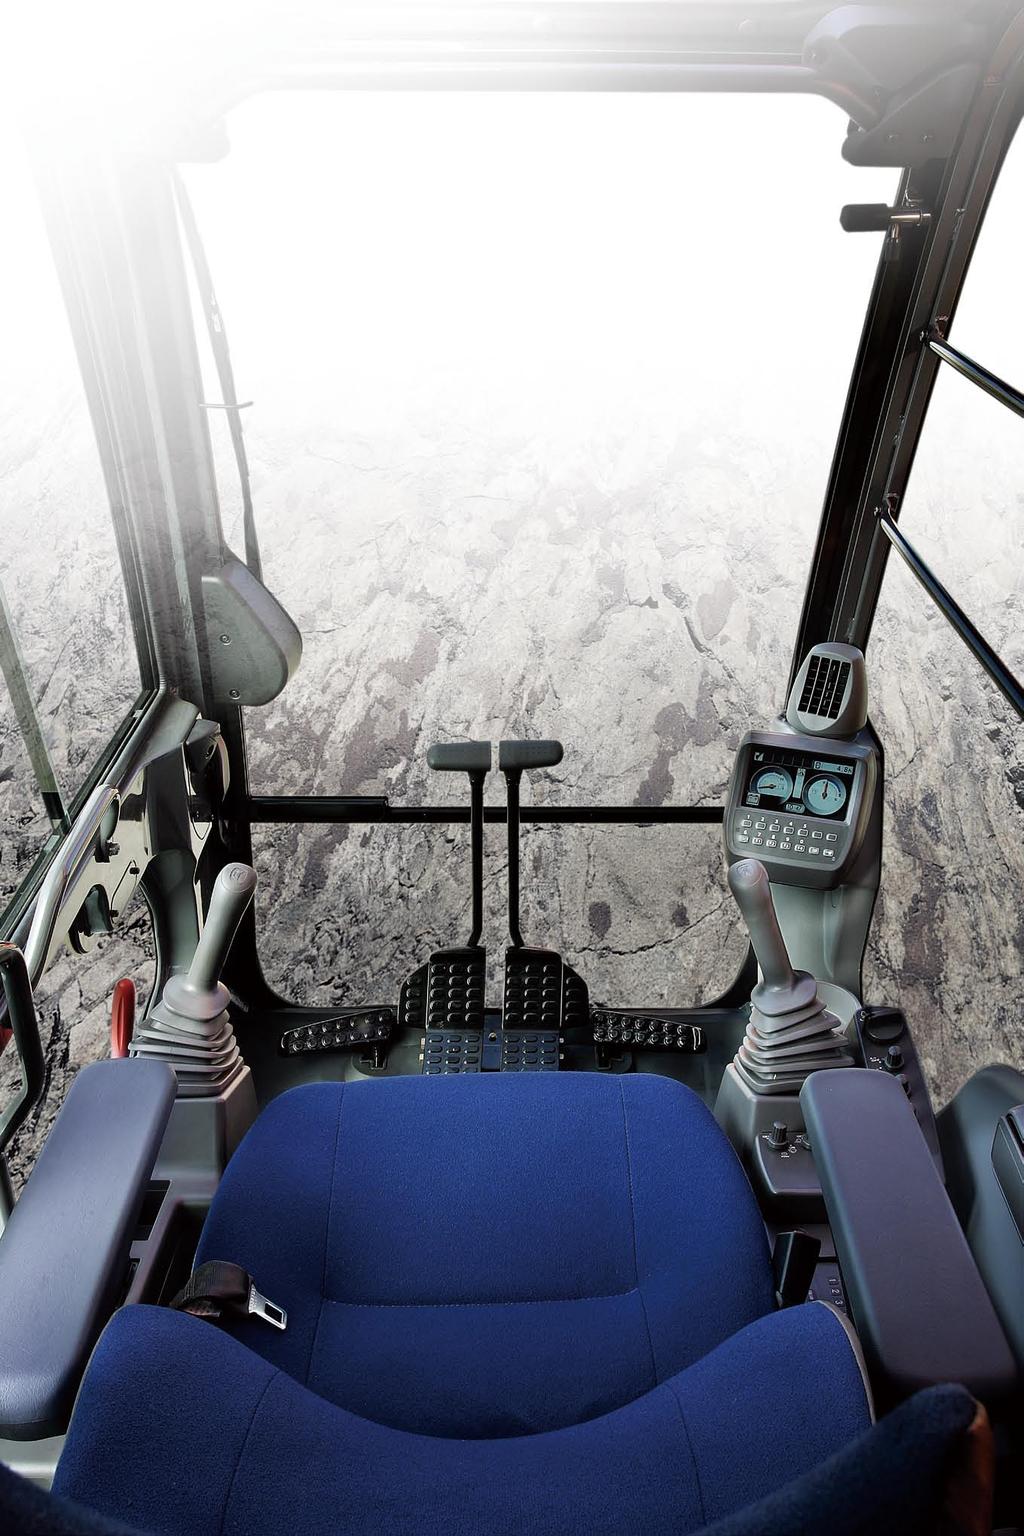 New Standard in Operator Comfort The operator's seat of the ZXIS-3 series gives the operator an excellent view of the jobsite.